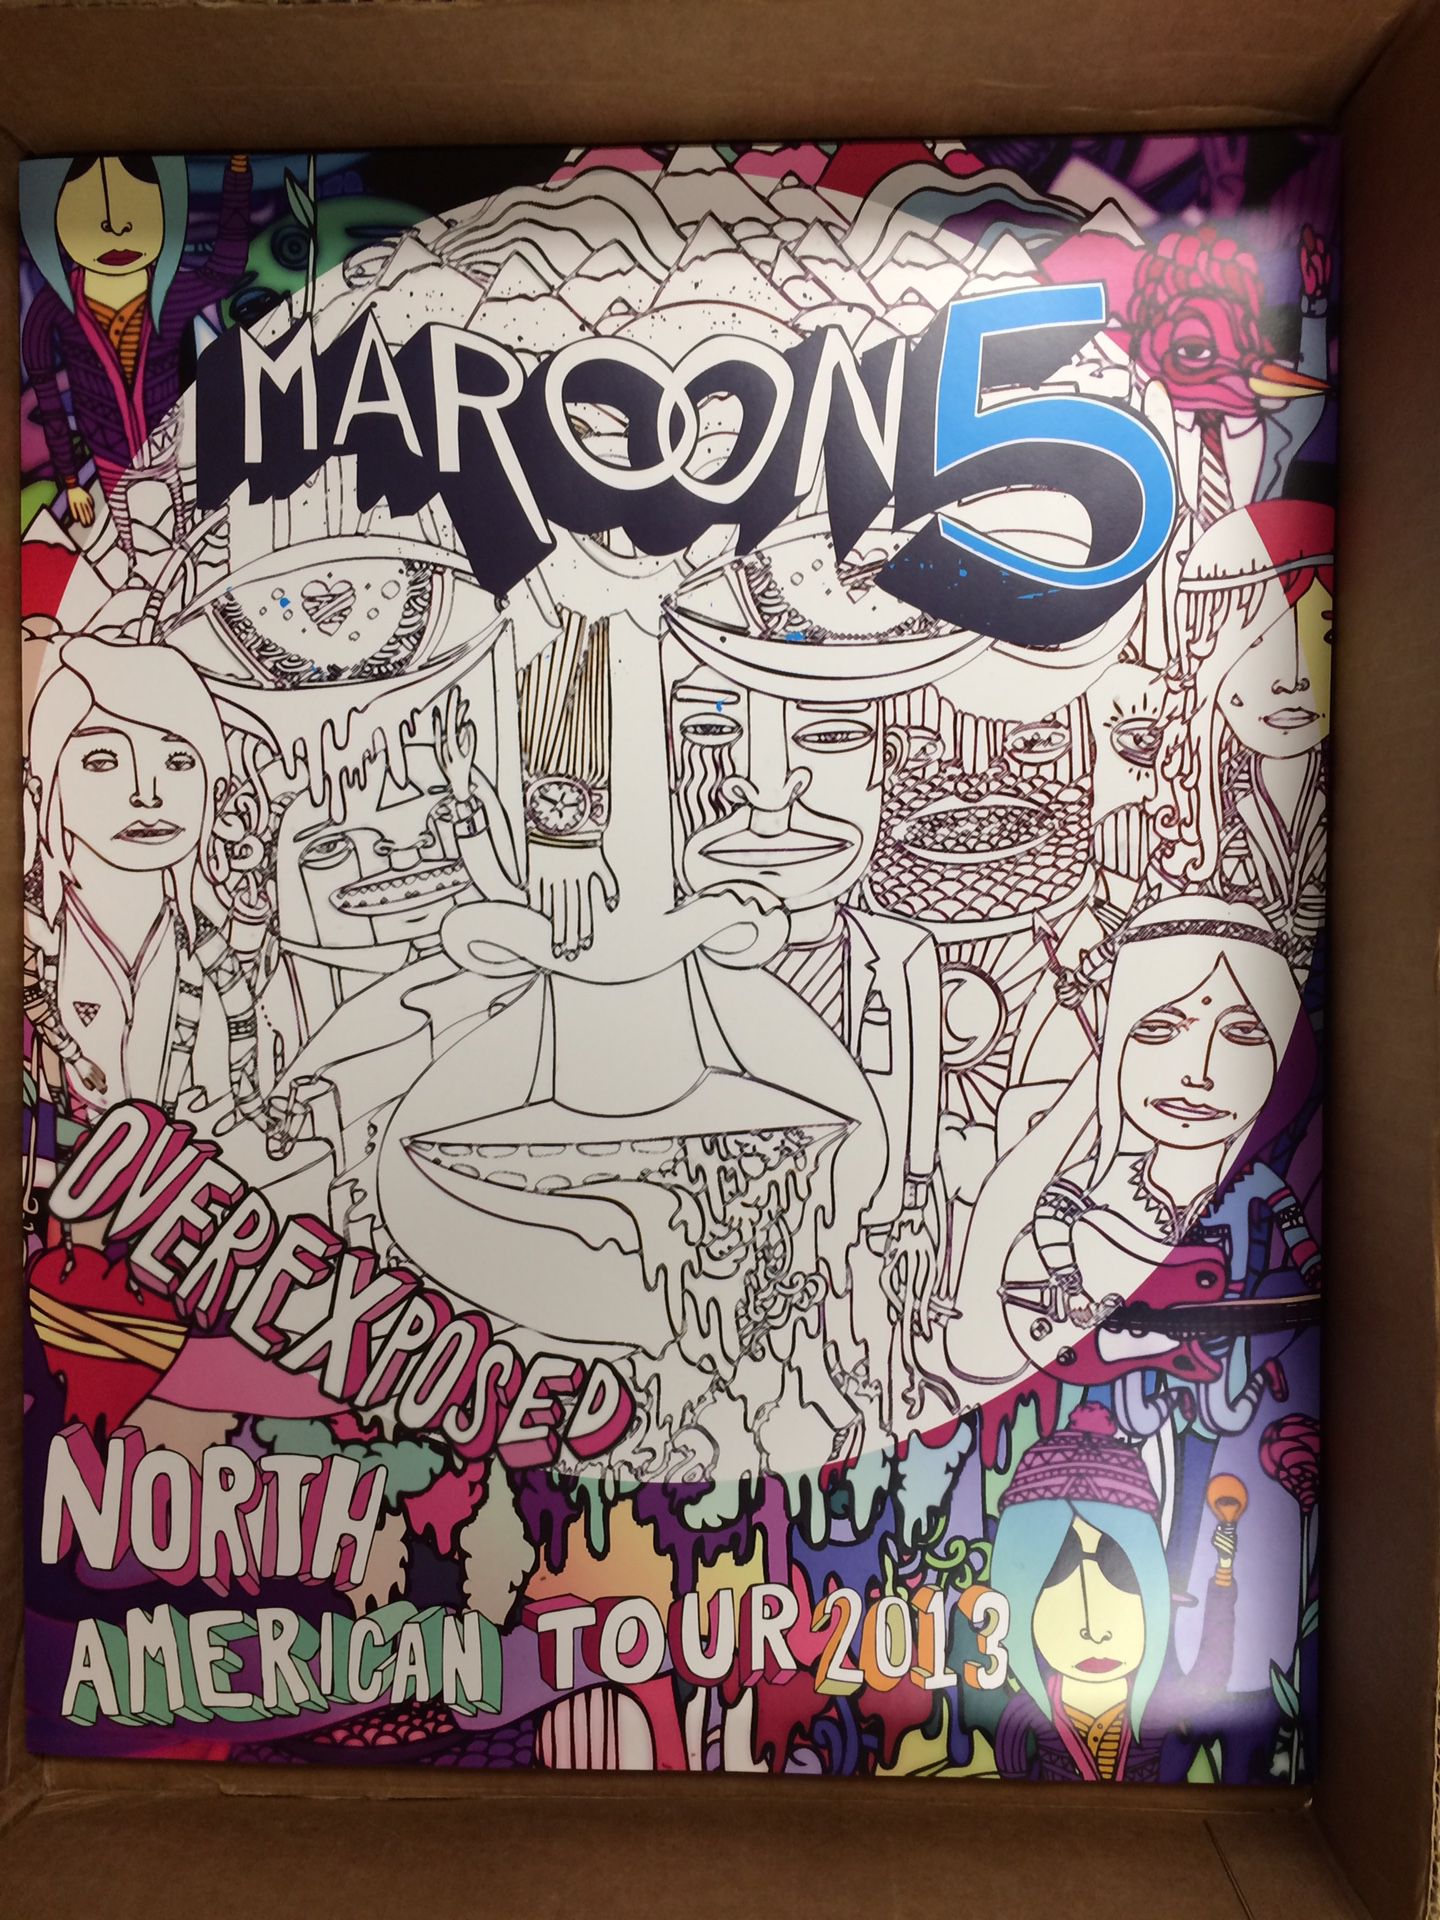 Maroon 5 Overexposed concert poster 2013